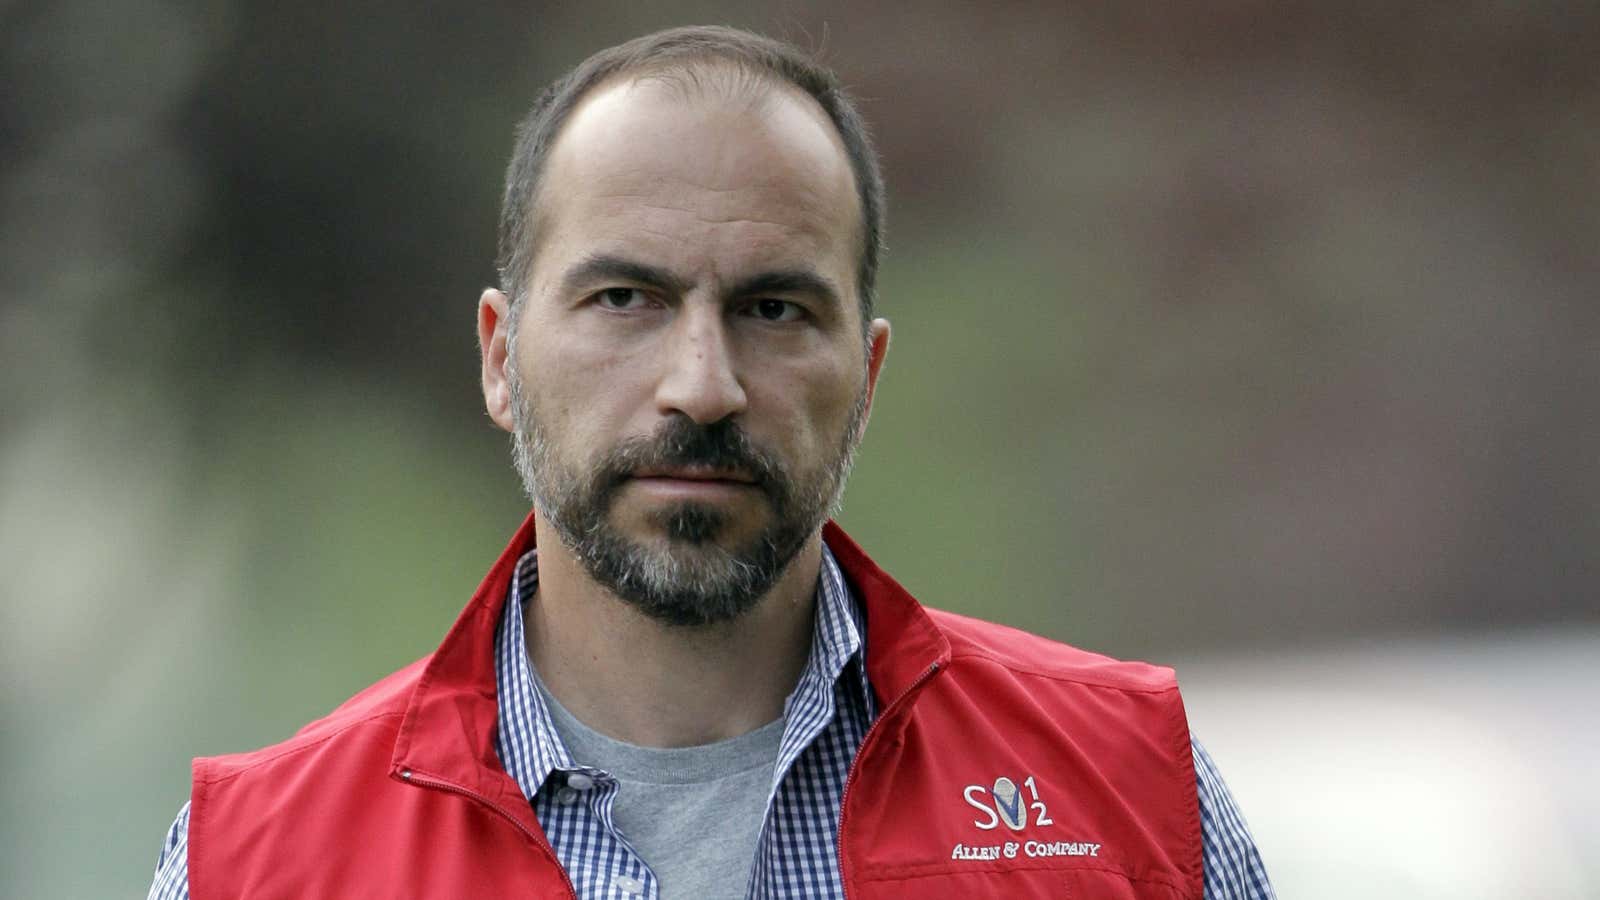 FILE- In this July 13, 2012, file photo, Dara Khosrowshahi the CEO of Expedia, Inc., attends the Allen &amp; Company Sun Valley Conference in Sun…